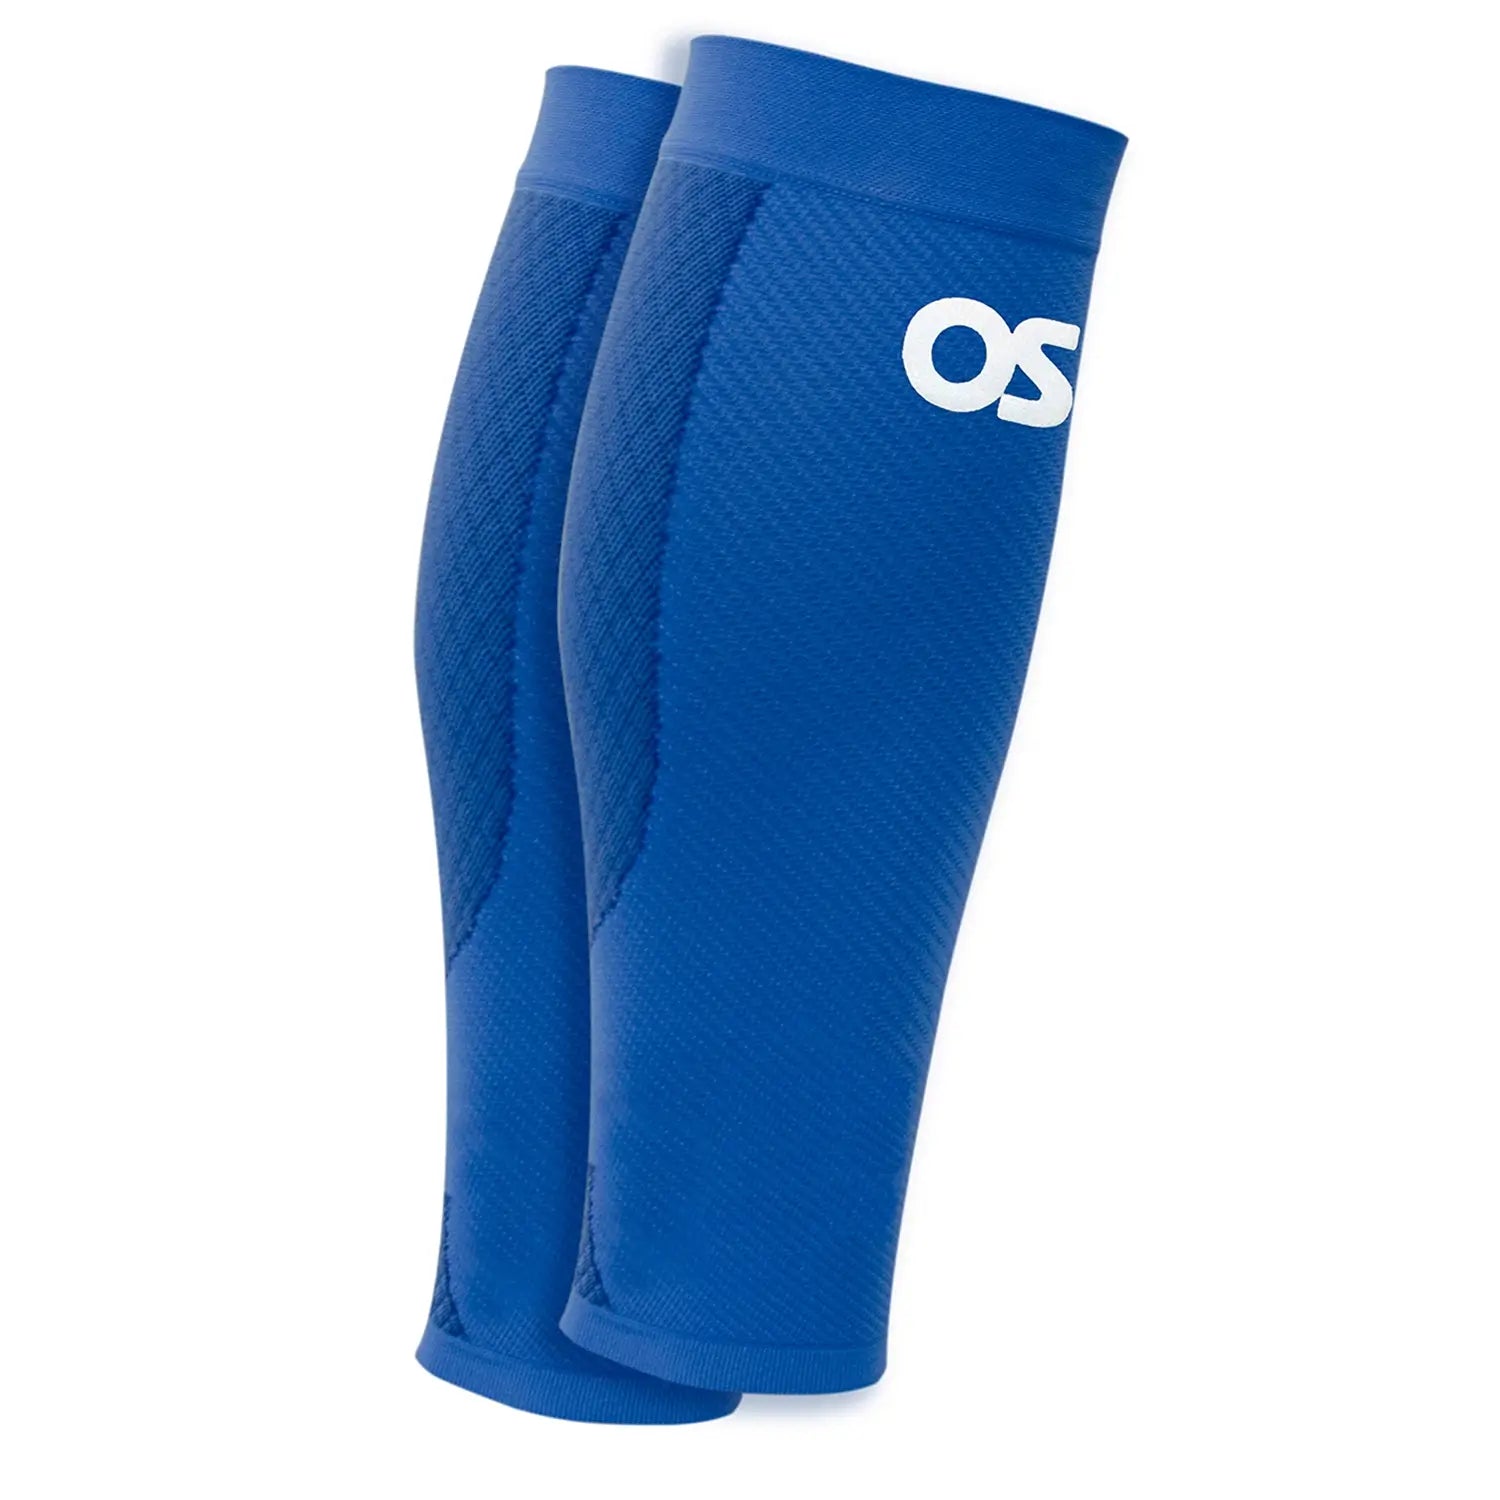 CS6 Calf Compression Sleeves For Lower Leg Pain & Swelling – My Foot Guy